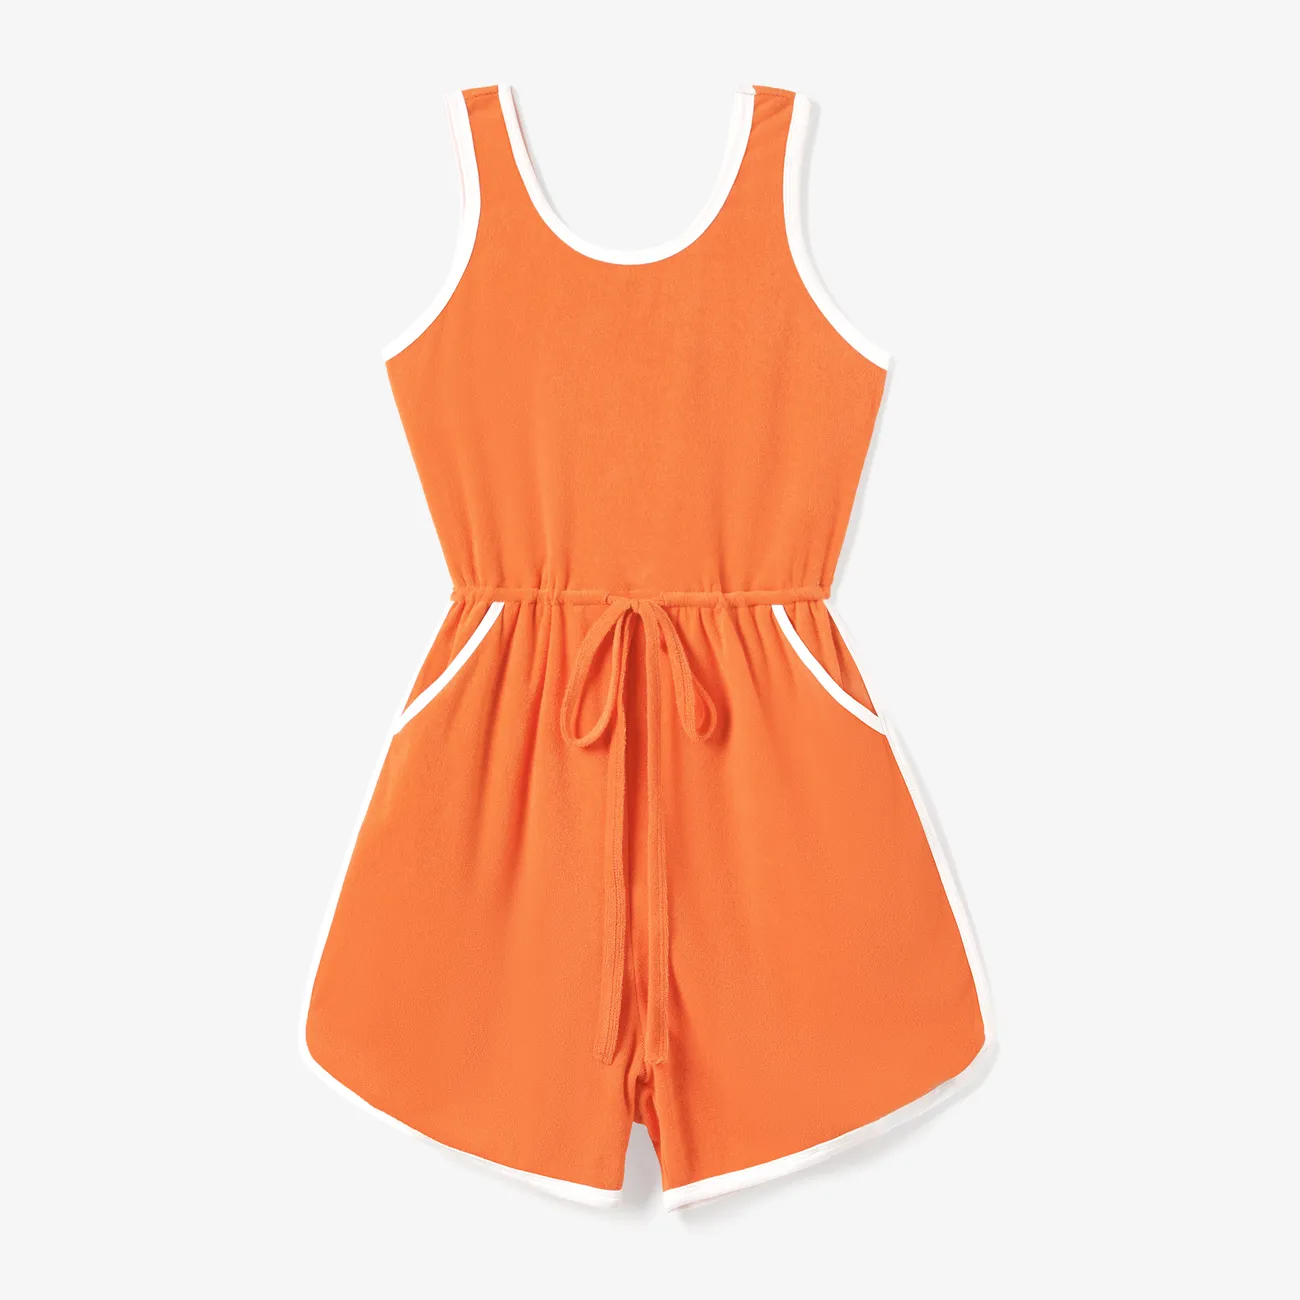 Mommy and Me Orange Towel Fabric Romper with Pockets and Drawstring Orangeyellow big image 1